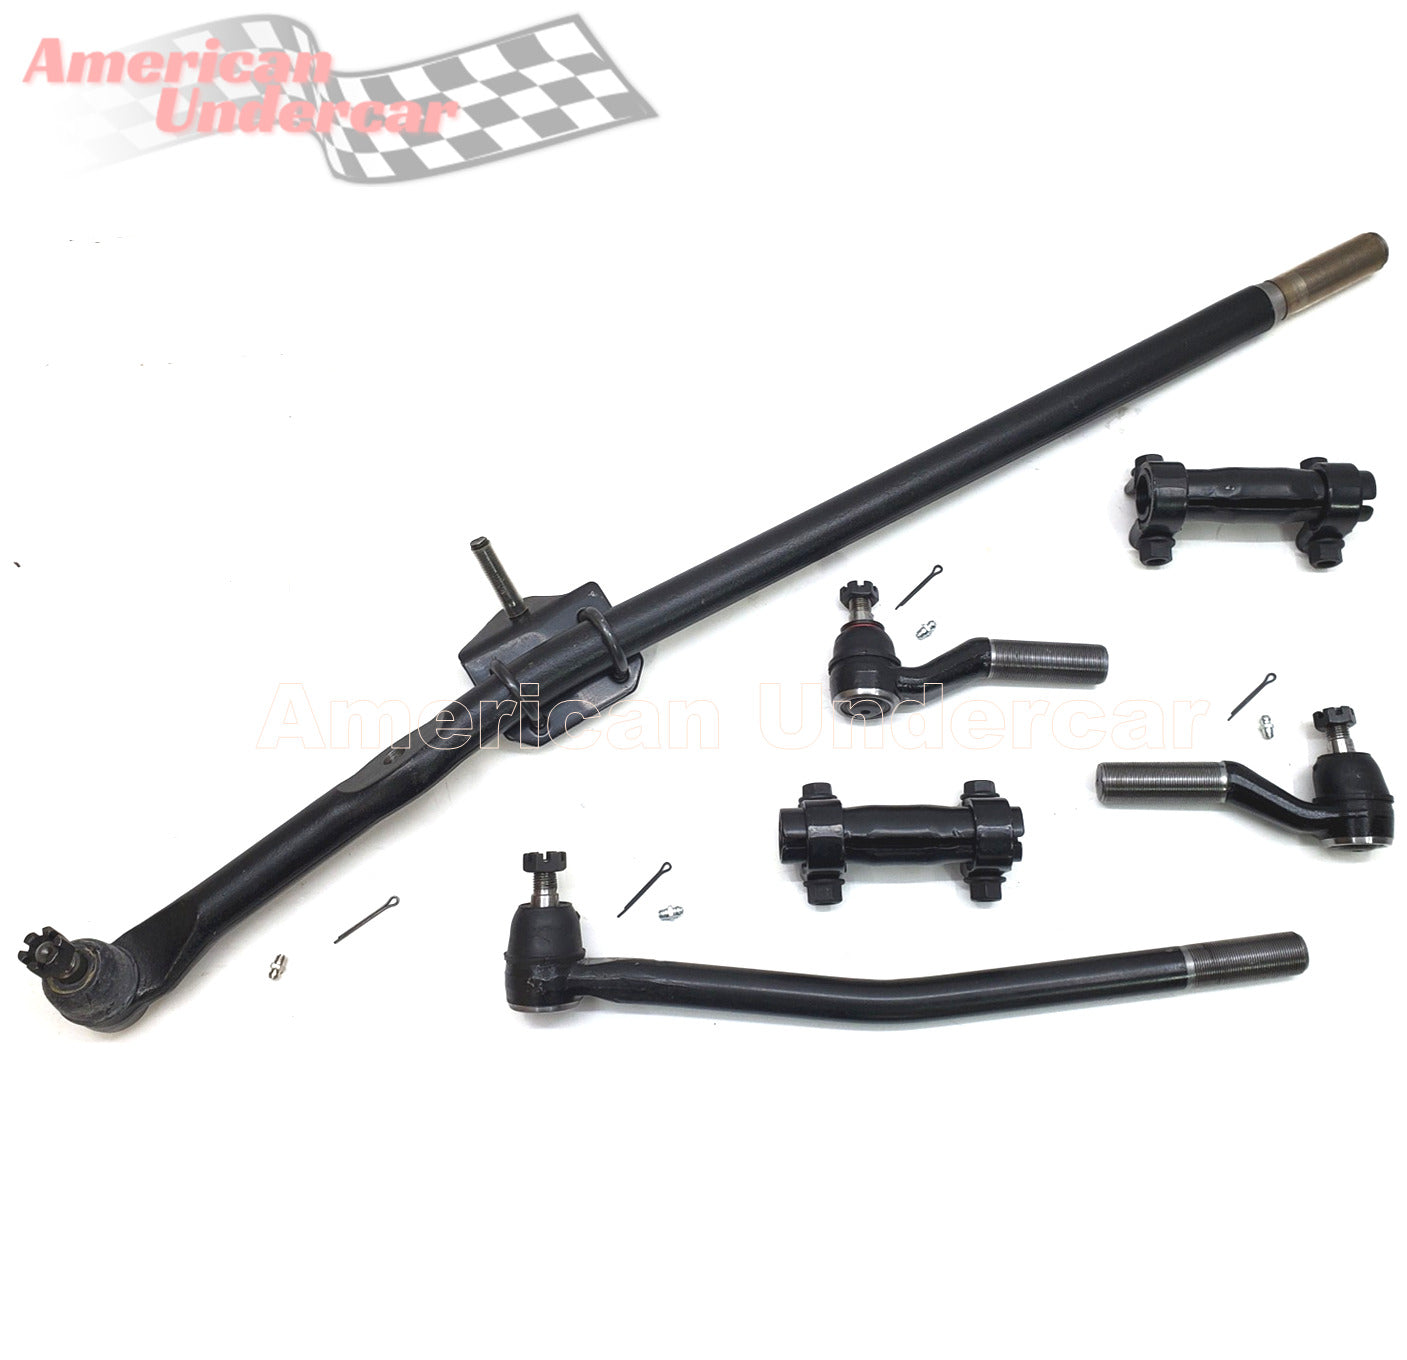 HD Drag Link Tie Rod Sleeve Steering Kit for 2008-2019 Ford E450 Super Duty DRW